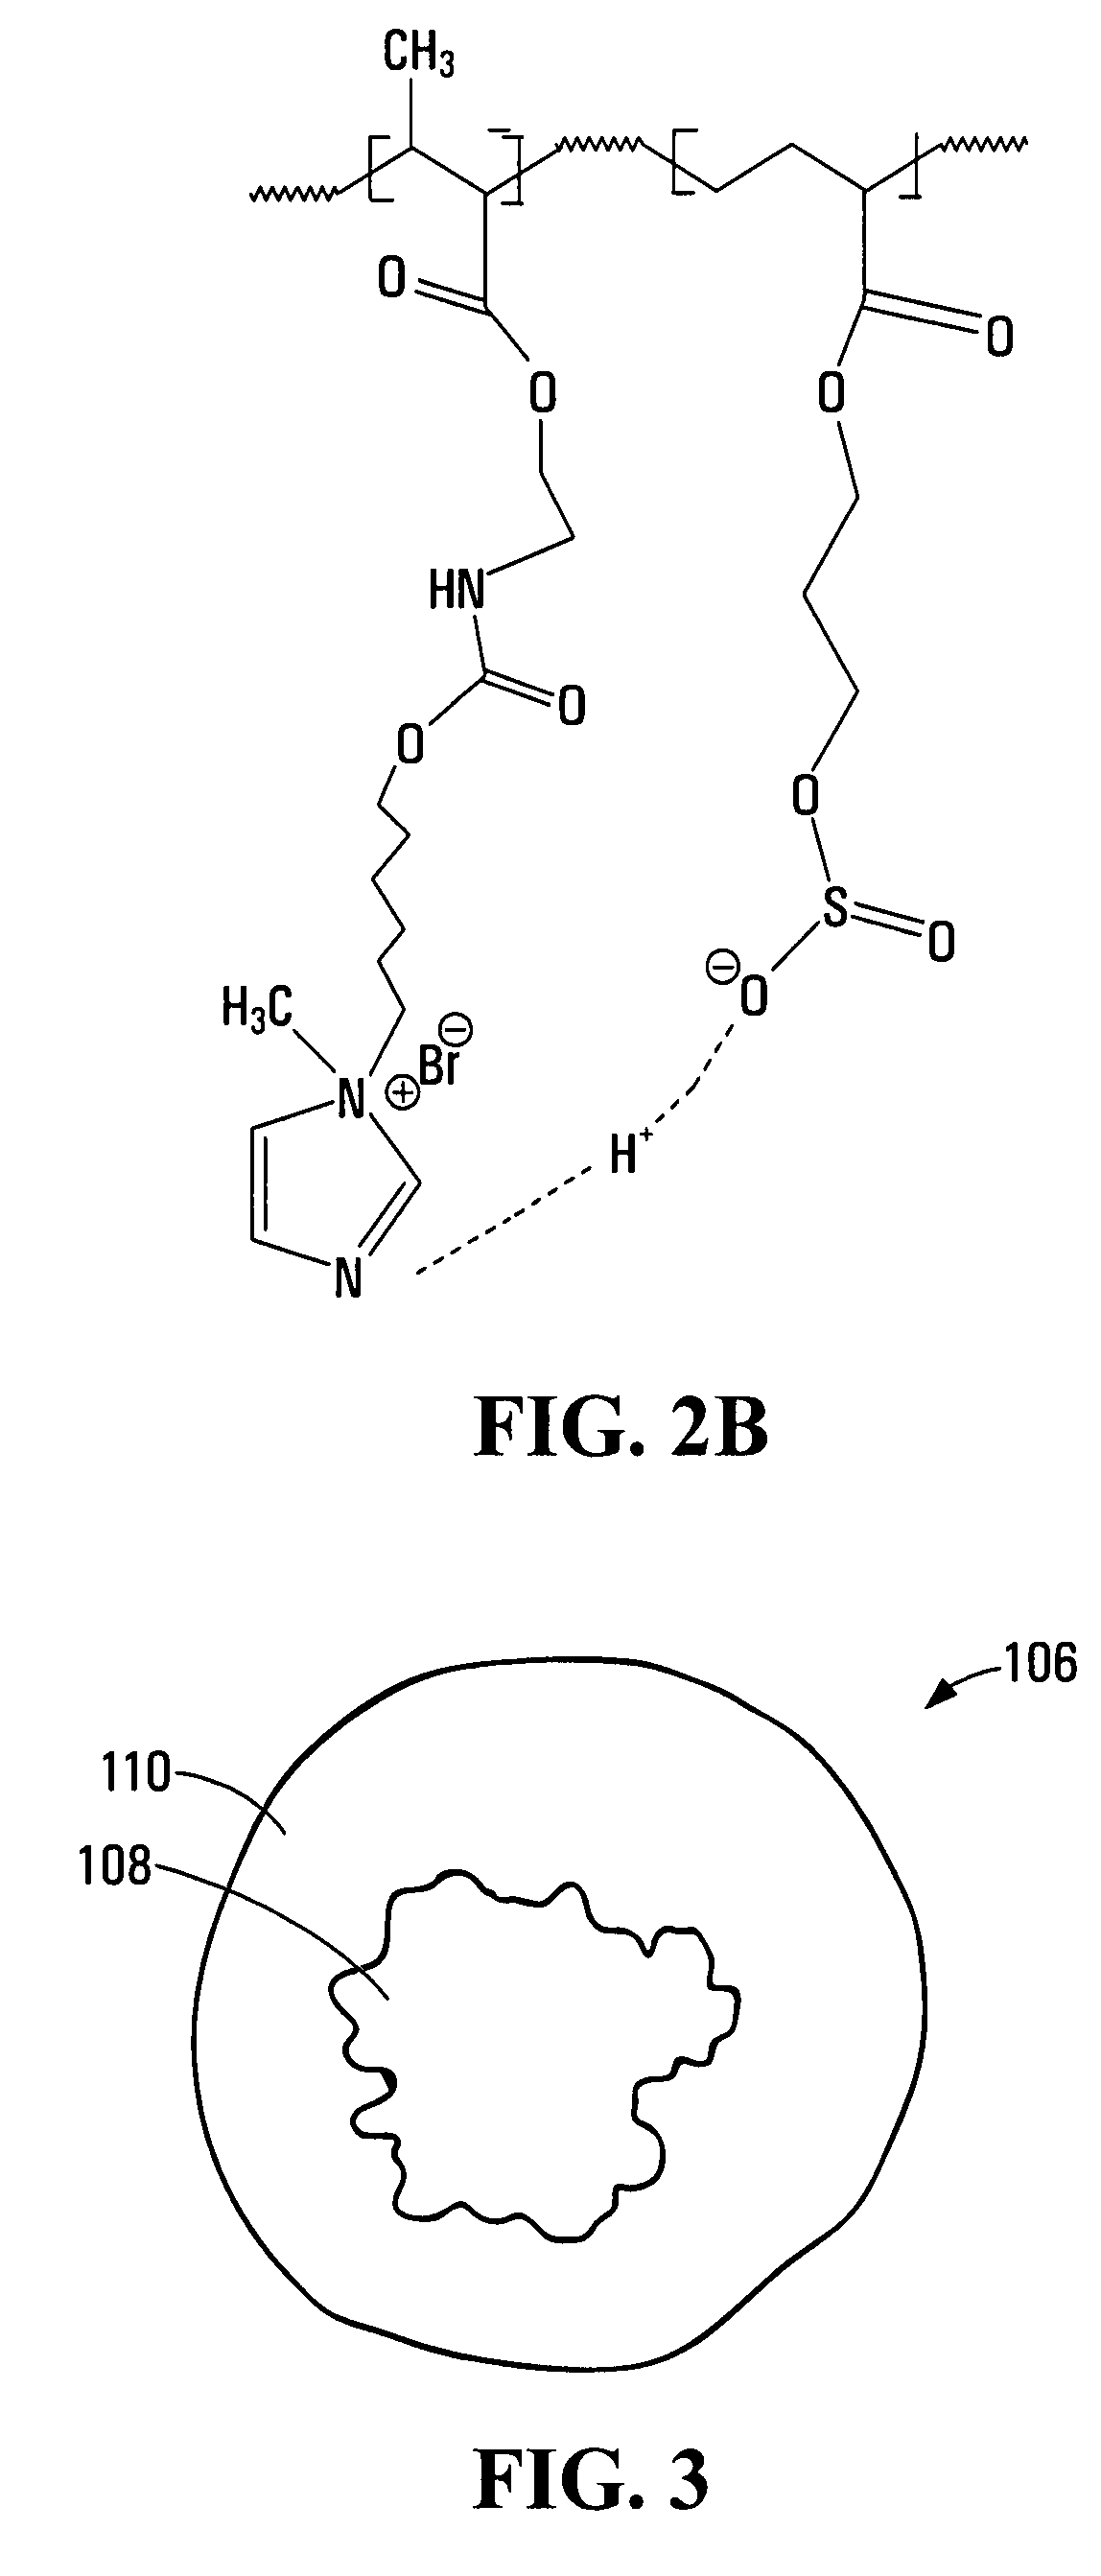 Proton-exchange composite containing nanoparticles having outer oligomeric ionomer, and methods of forming